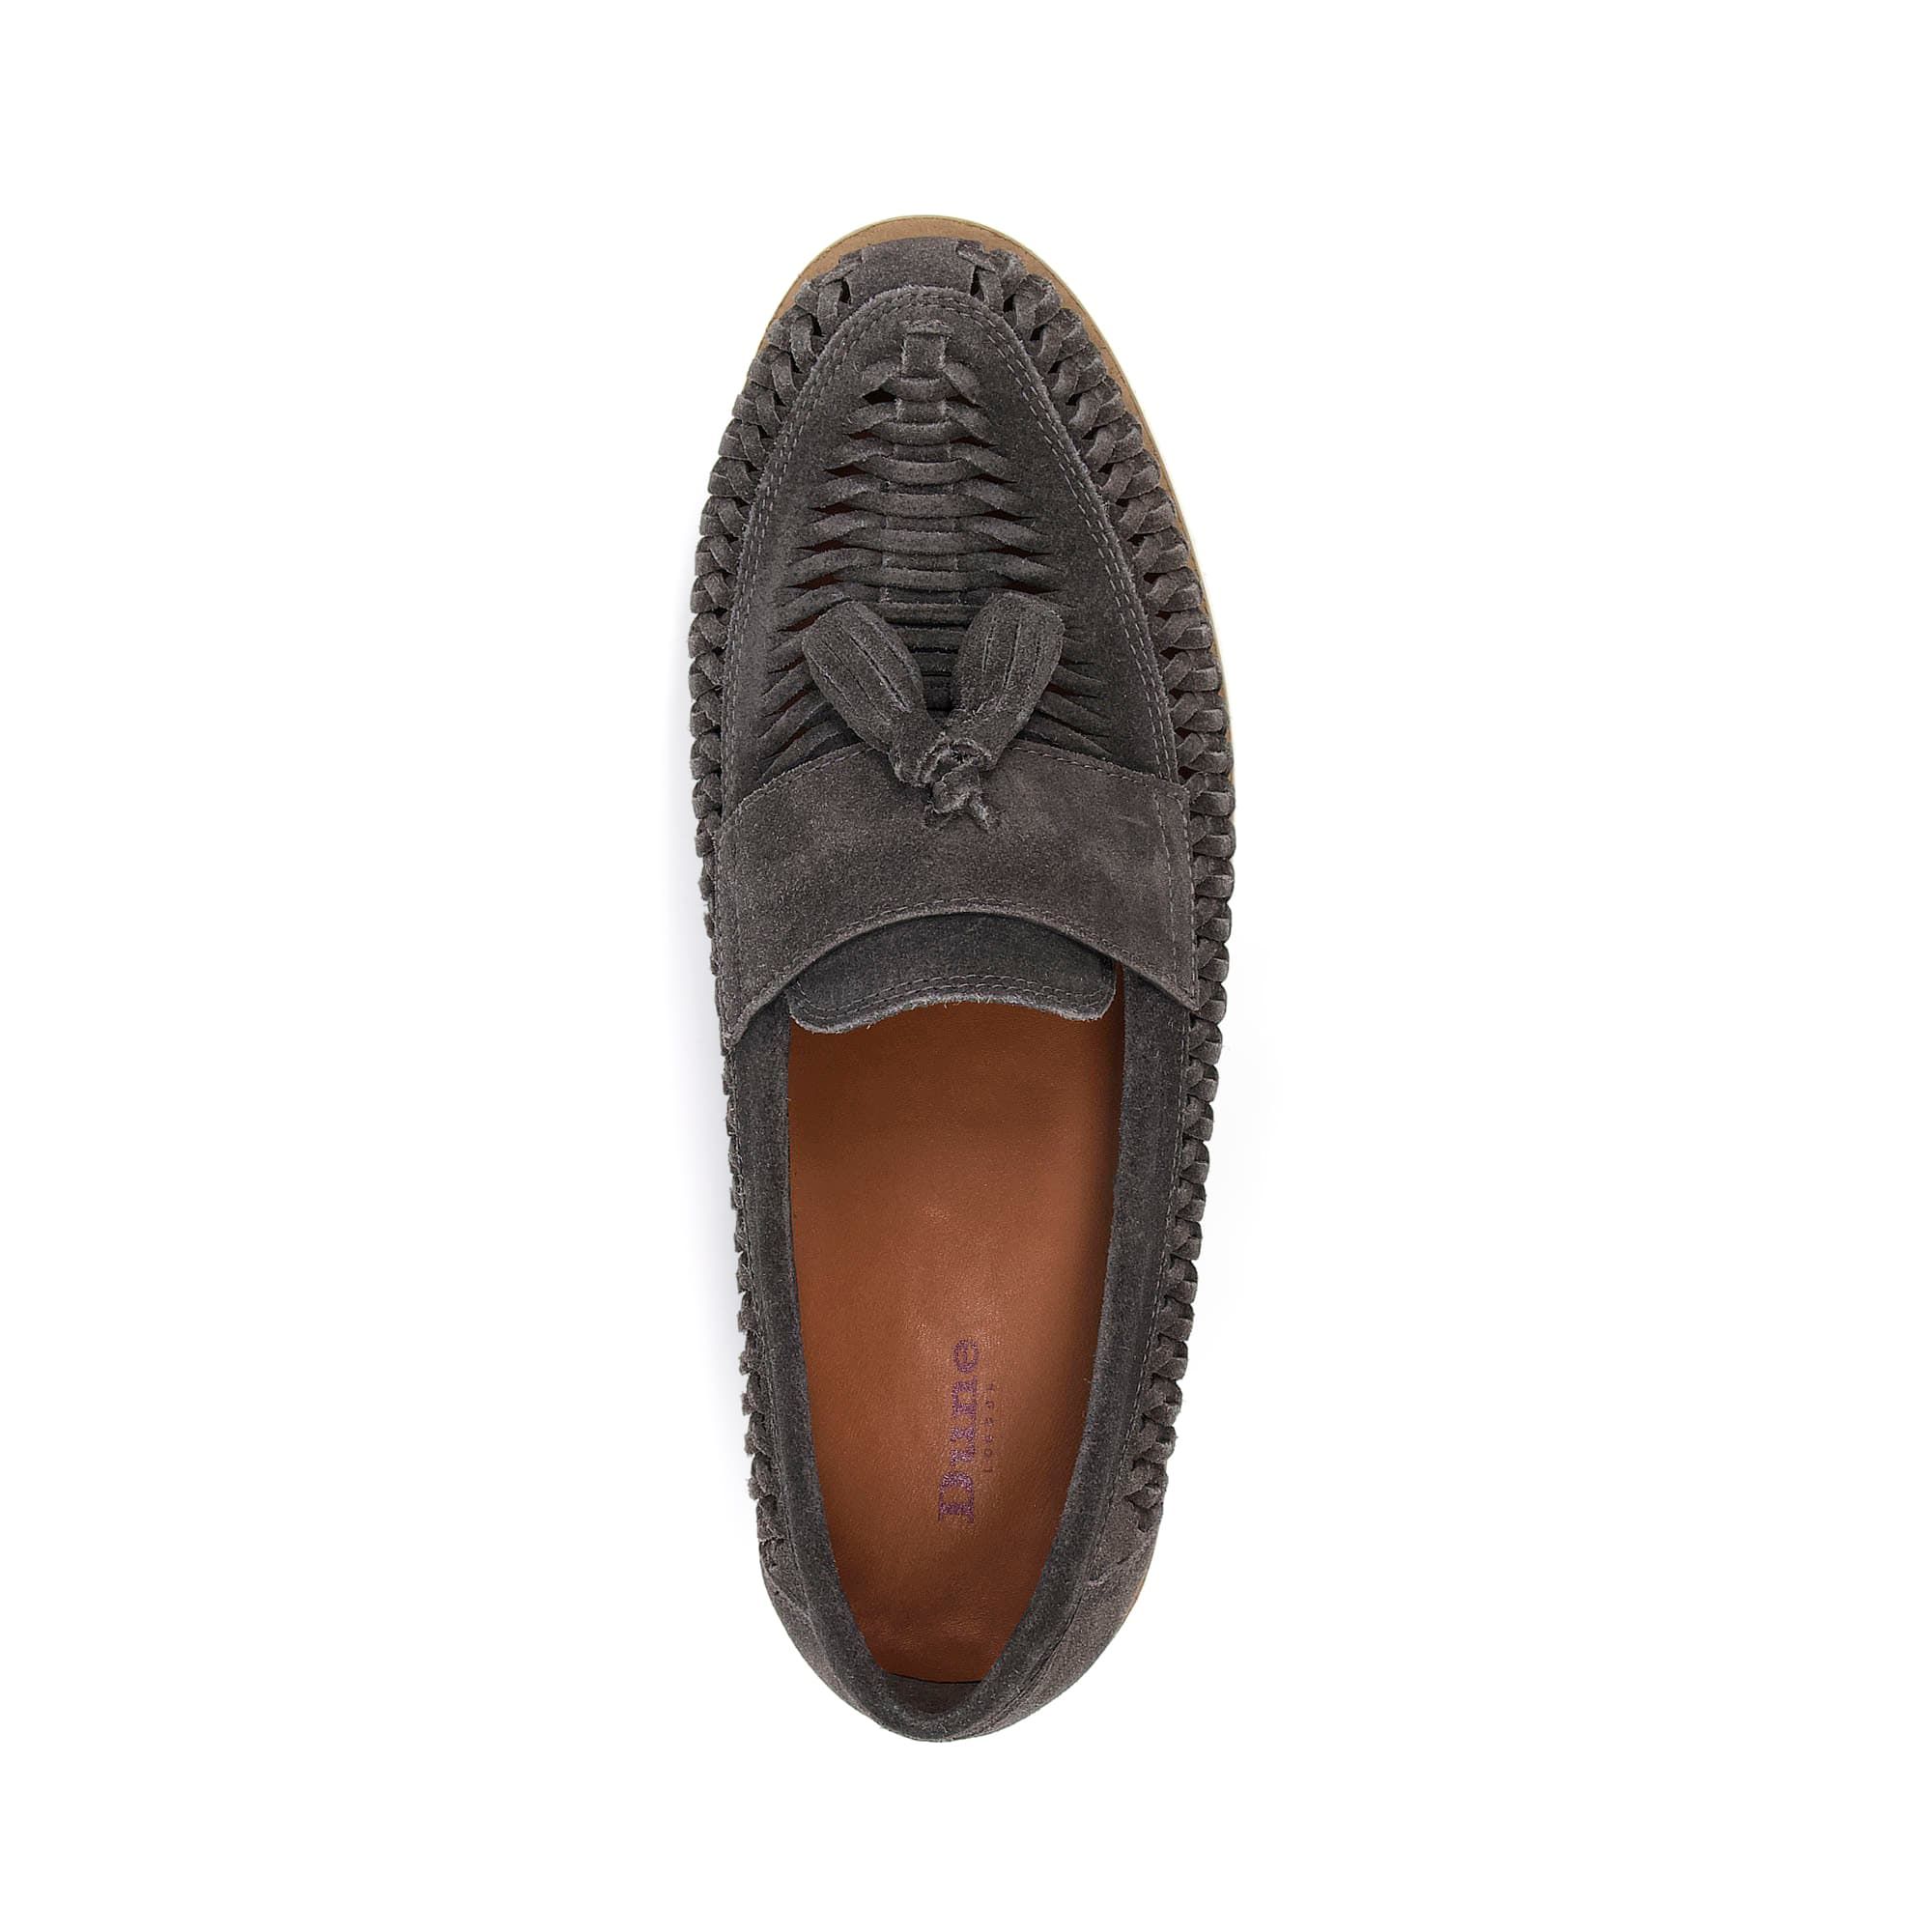 A go-to style for summer, our versatile Buckey loafers combine comfort and style. This easy-to-wear profile features woven side detailing and a traditional tassel trim. Perfect for seasonal events and everyday styling.